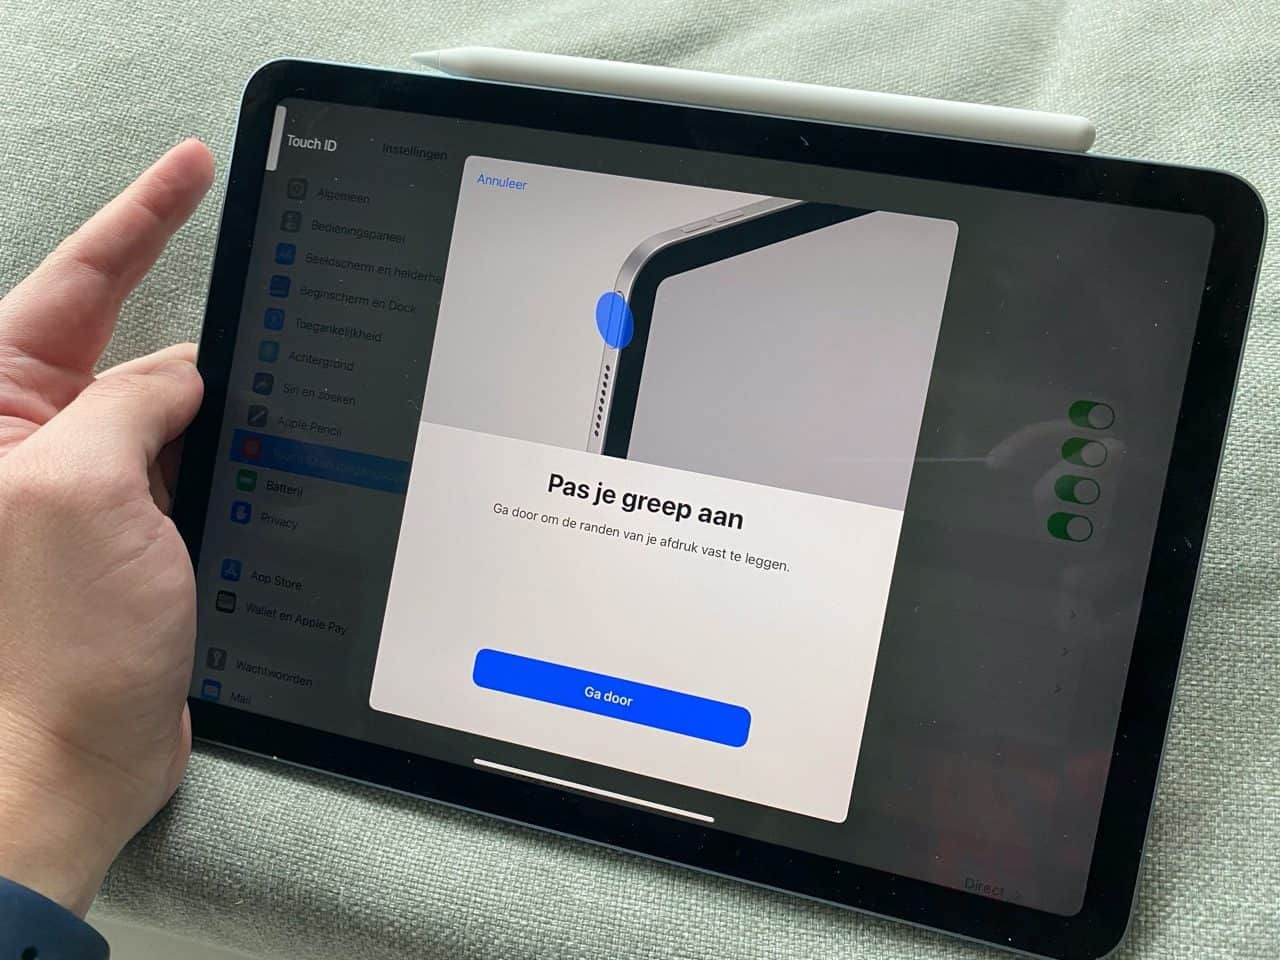 iPad Air 2020 review: Touch ID instellen.